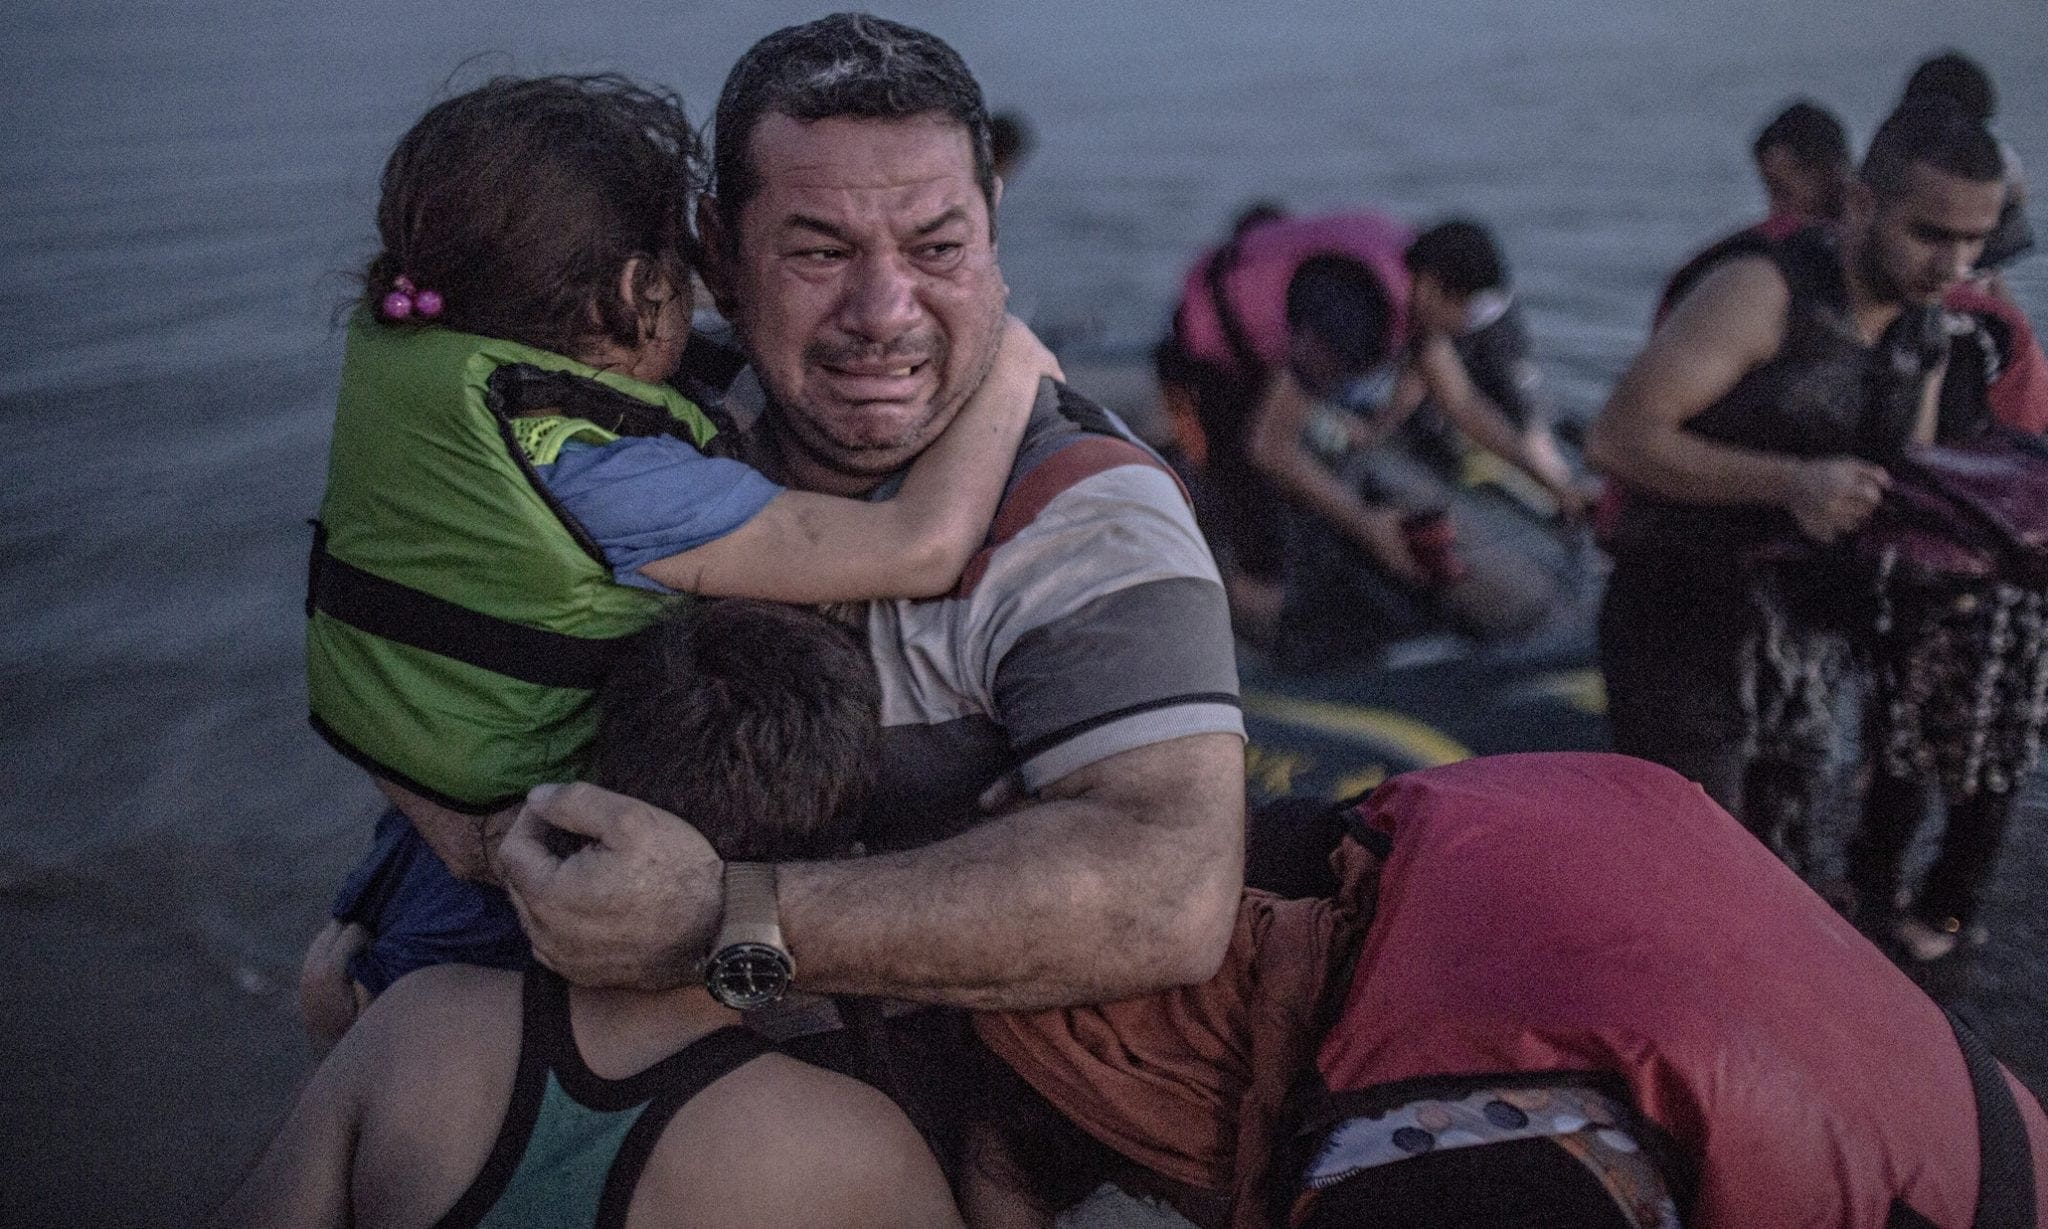 Laith Majid cries tears of joy and relief that he and his children have made it to Europe. Photograph: Daniet Etter/New York Times/Redux /eyevine